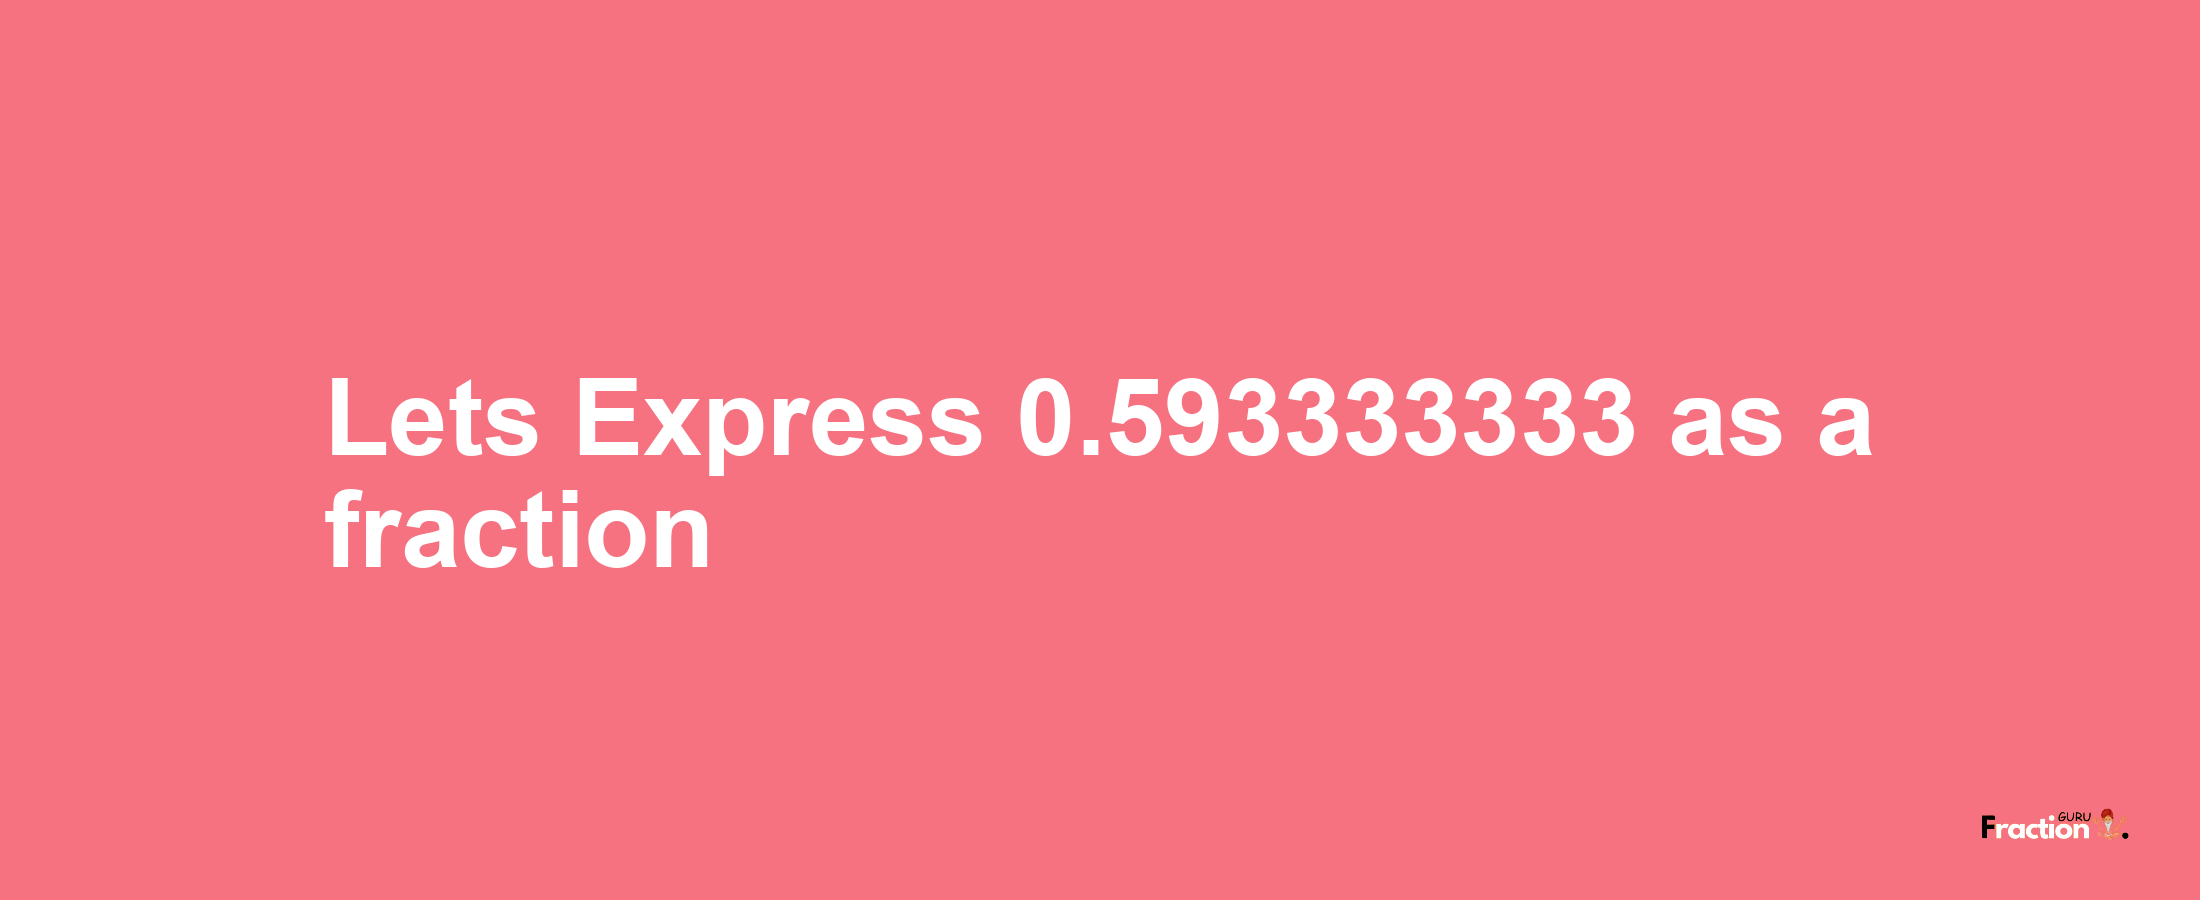 Lets Express 0.593333333 as afraction